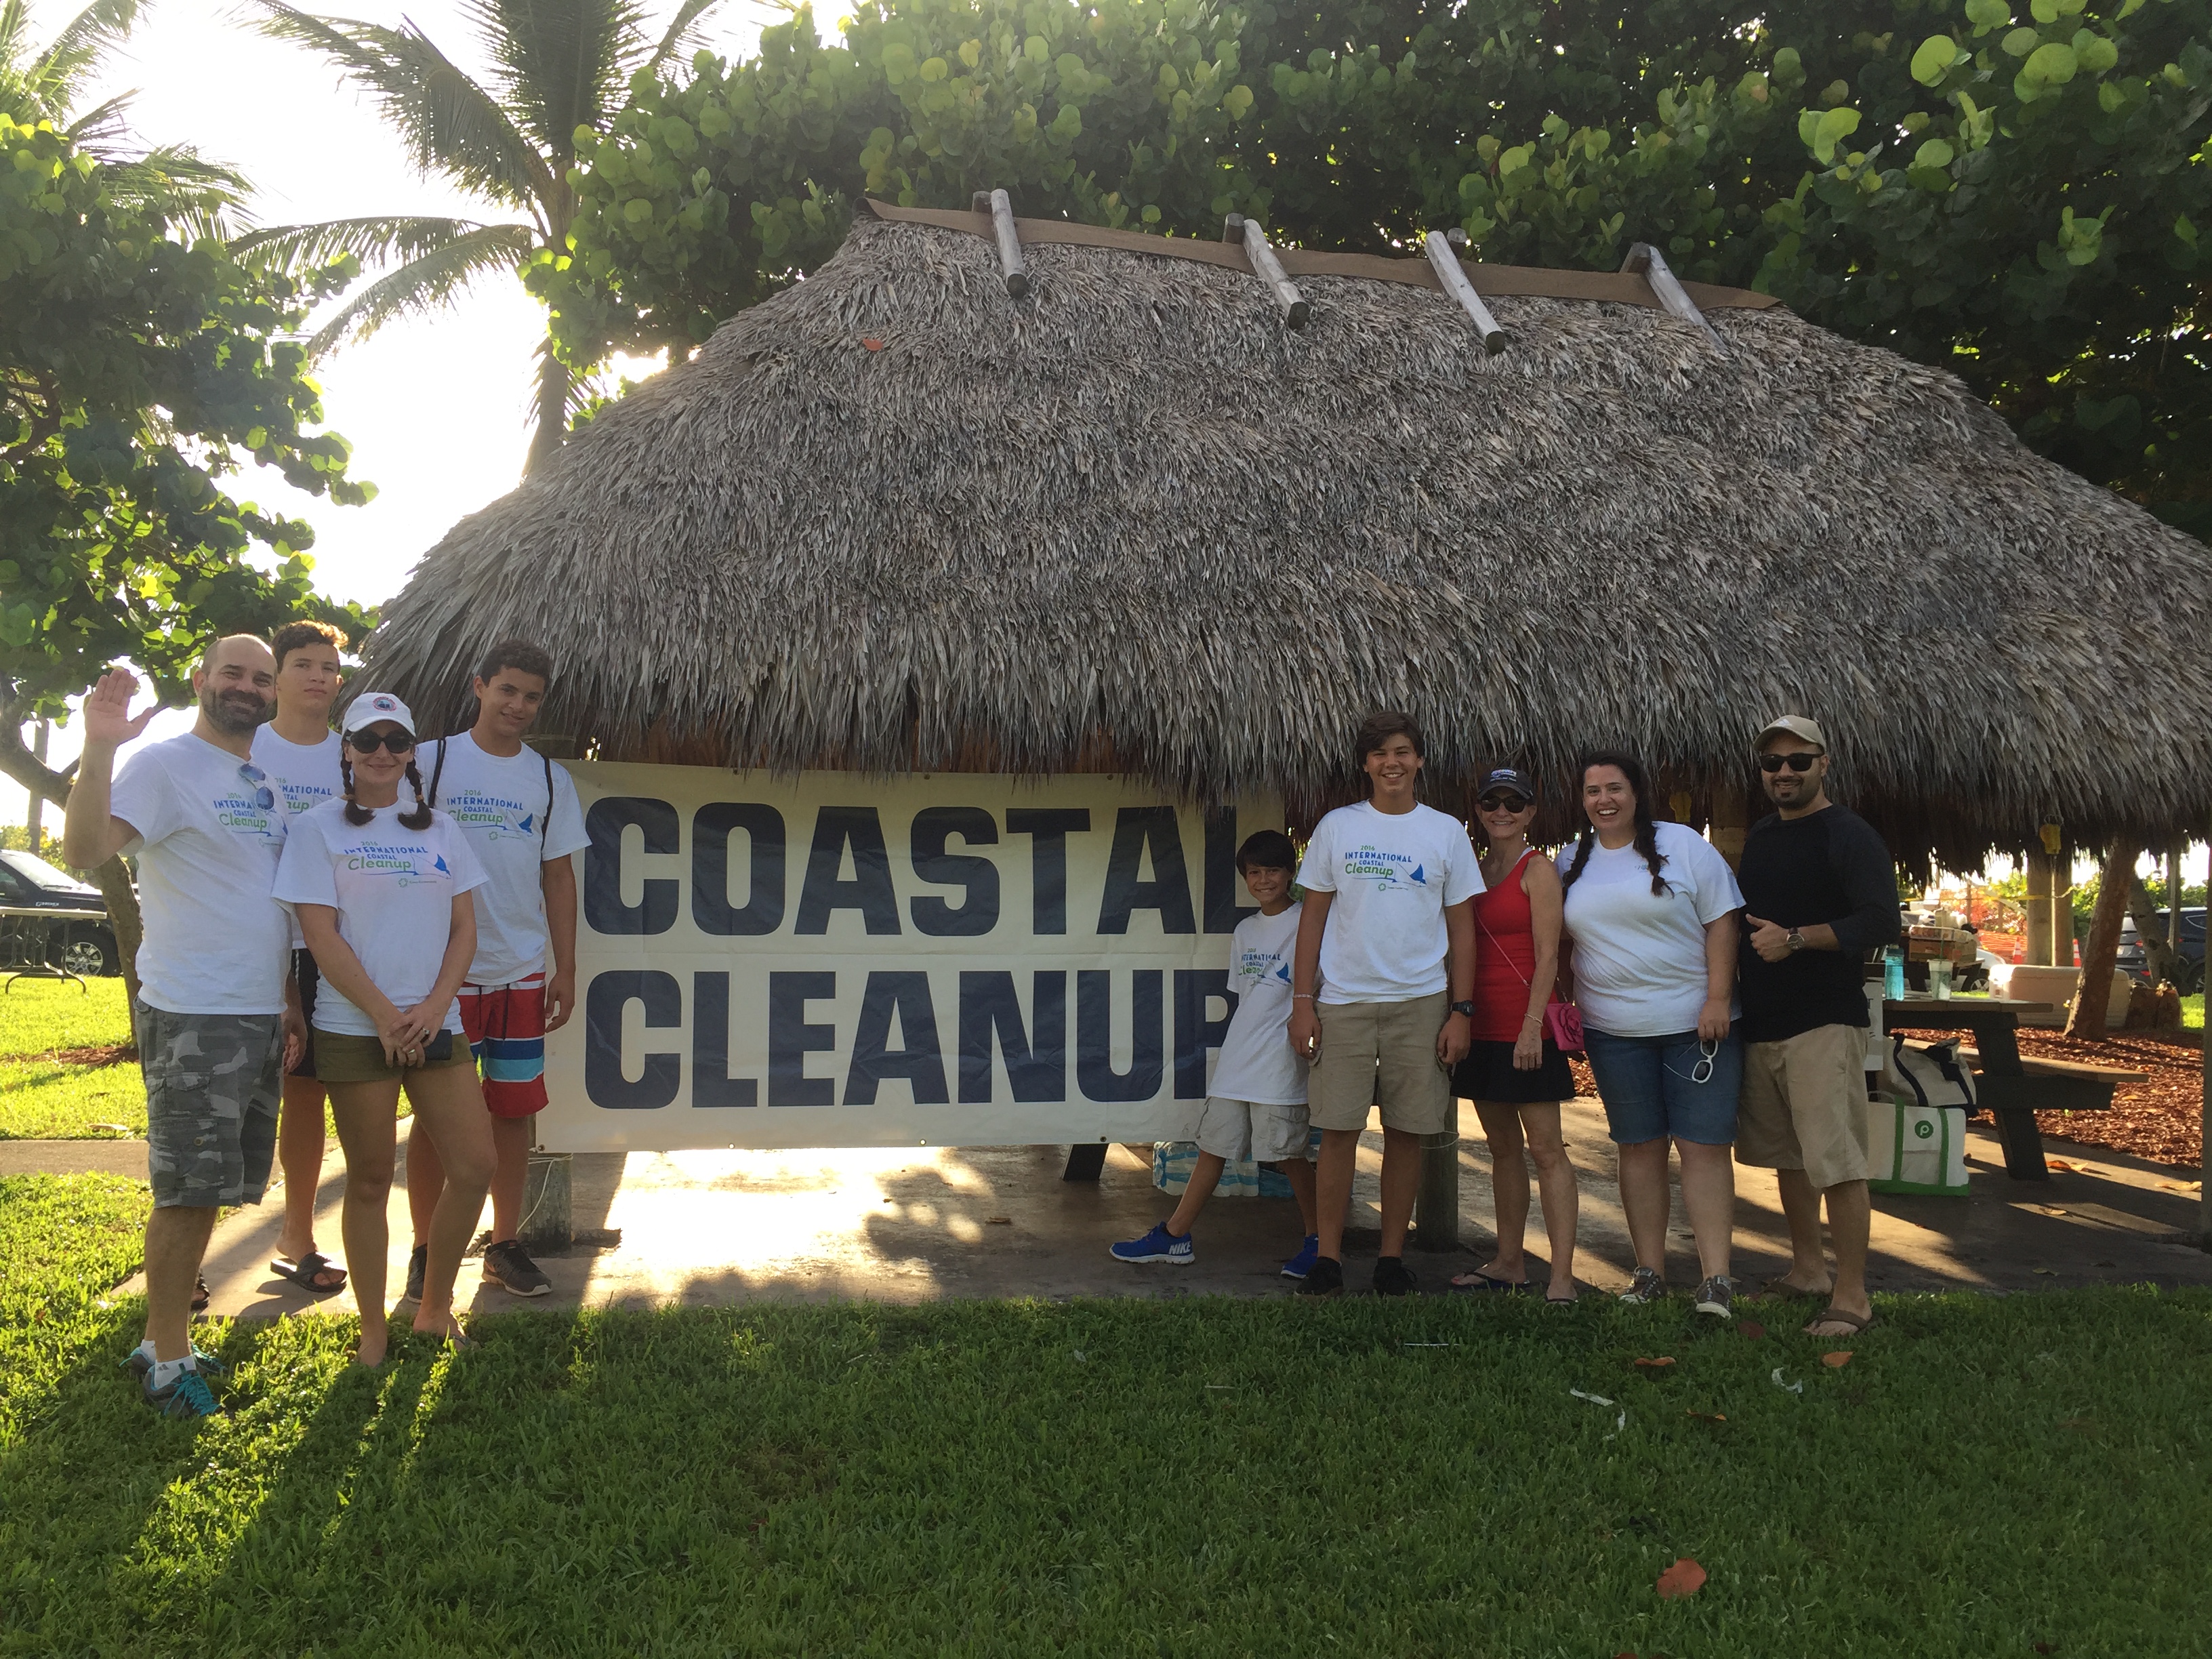 Students Can Earn Service Hours at 34th Annual International Coastal Cleanup 3